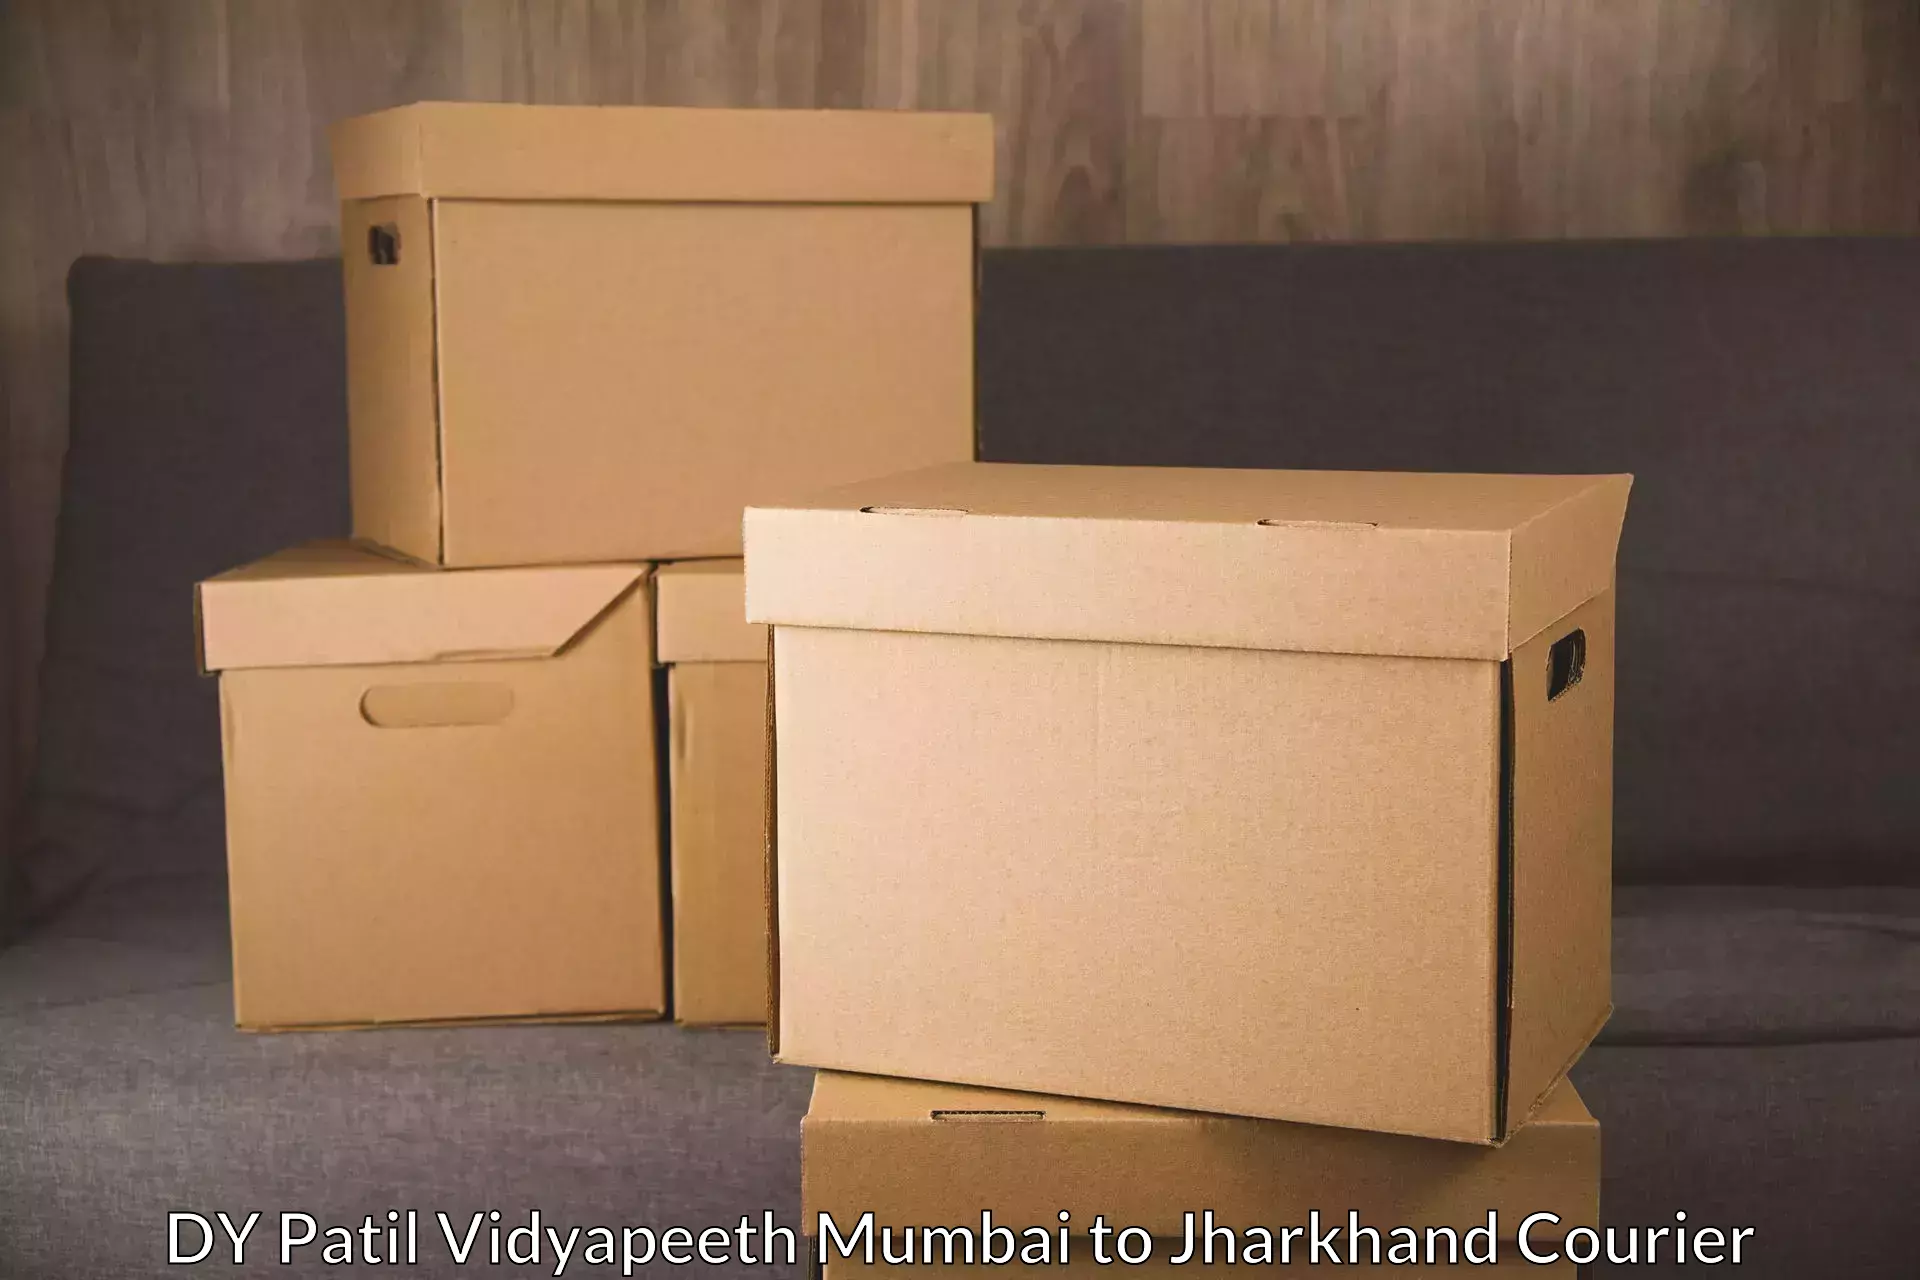 Premium courier solutions in DY Patil Vidyapeeth Mumbai to Chandil